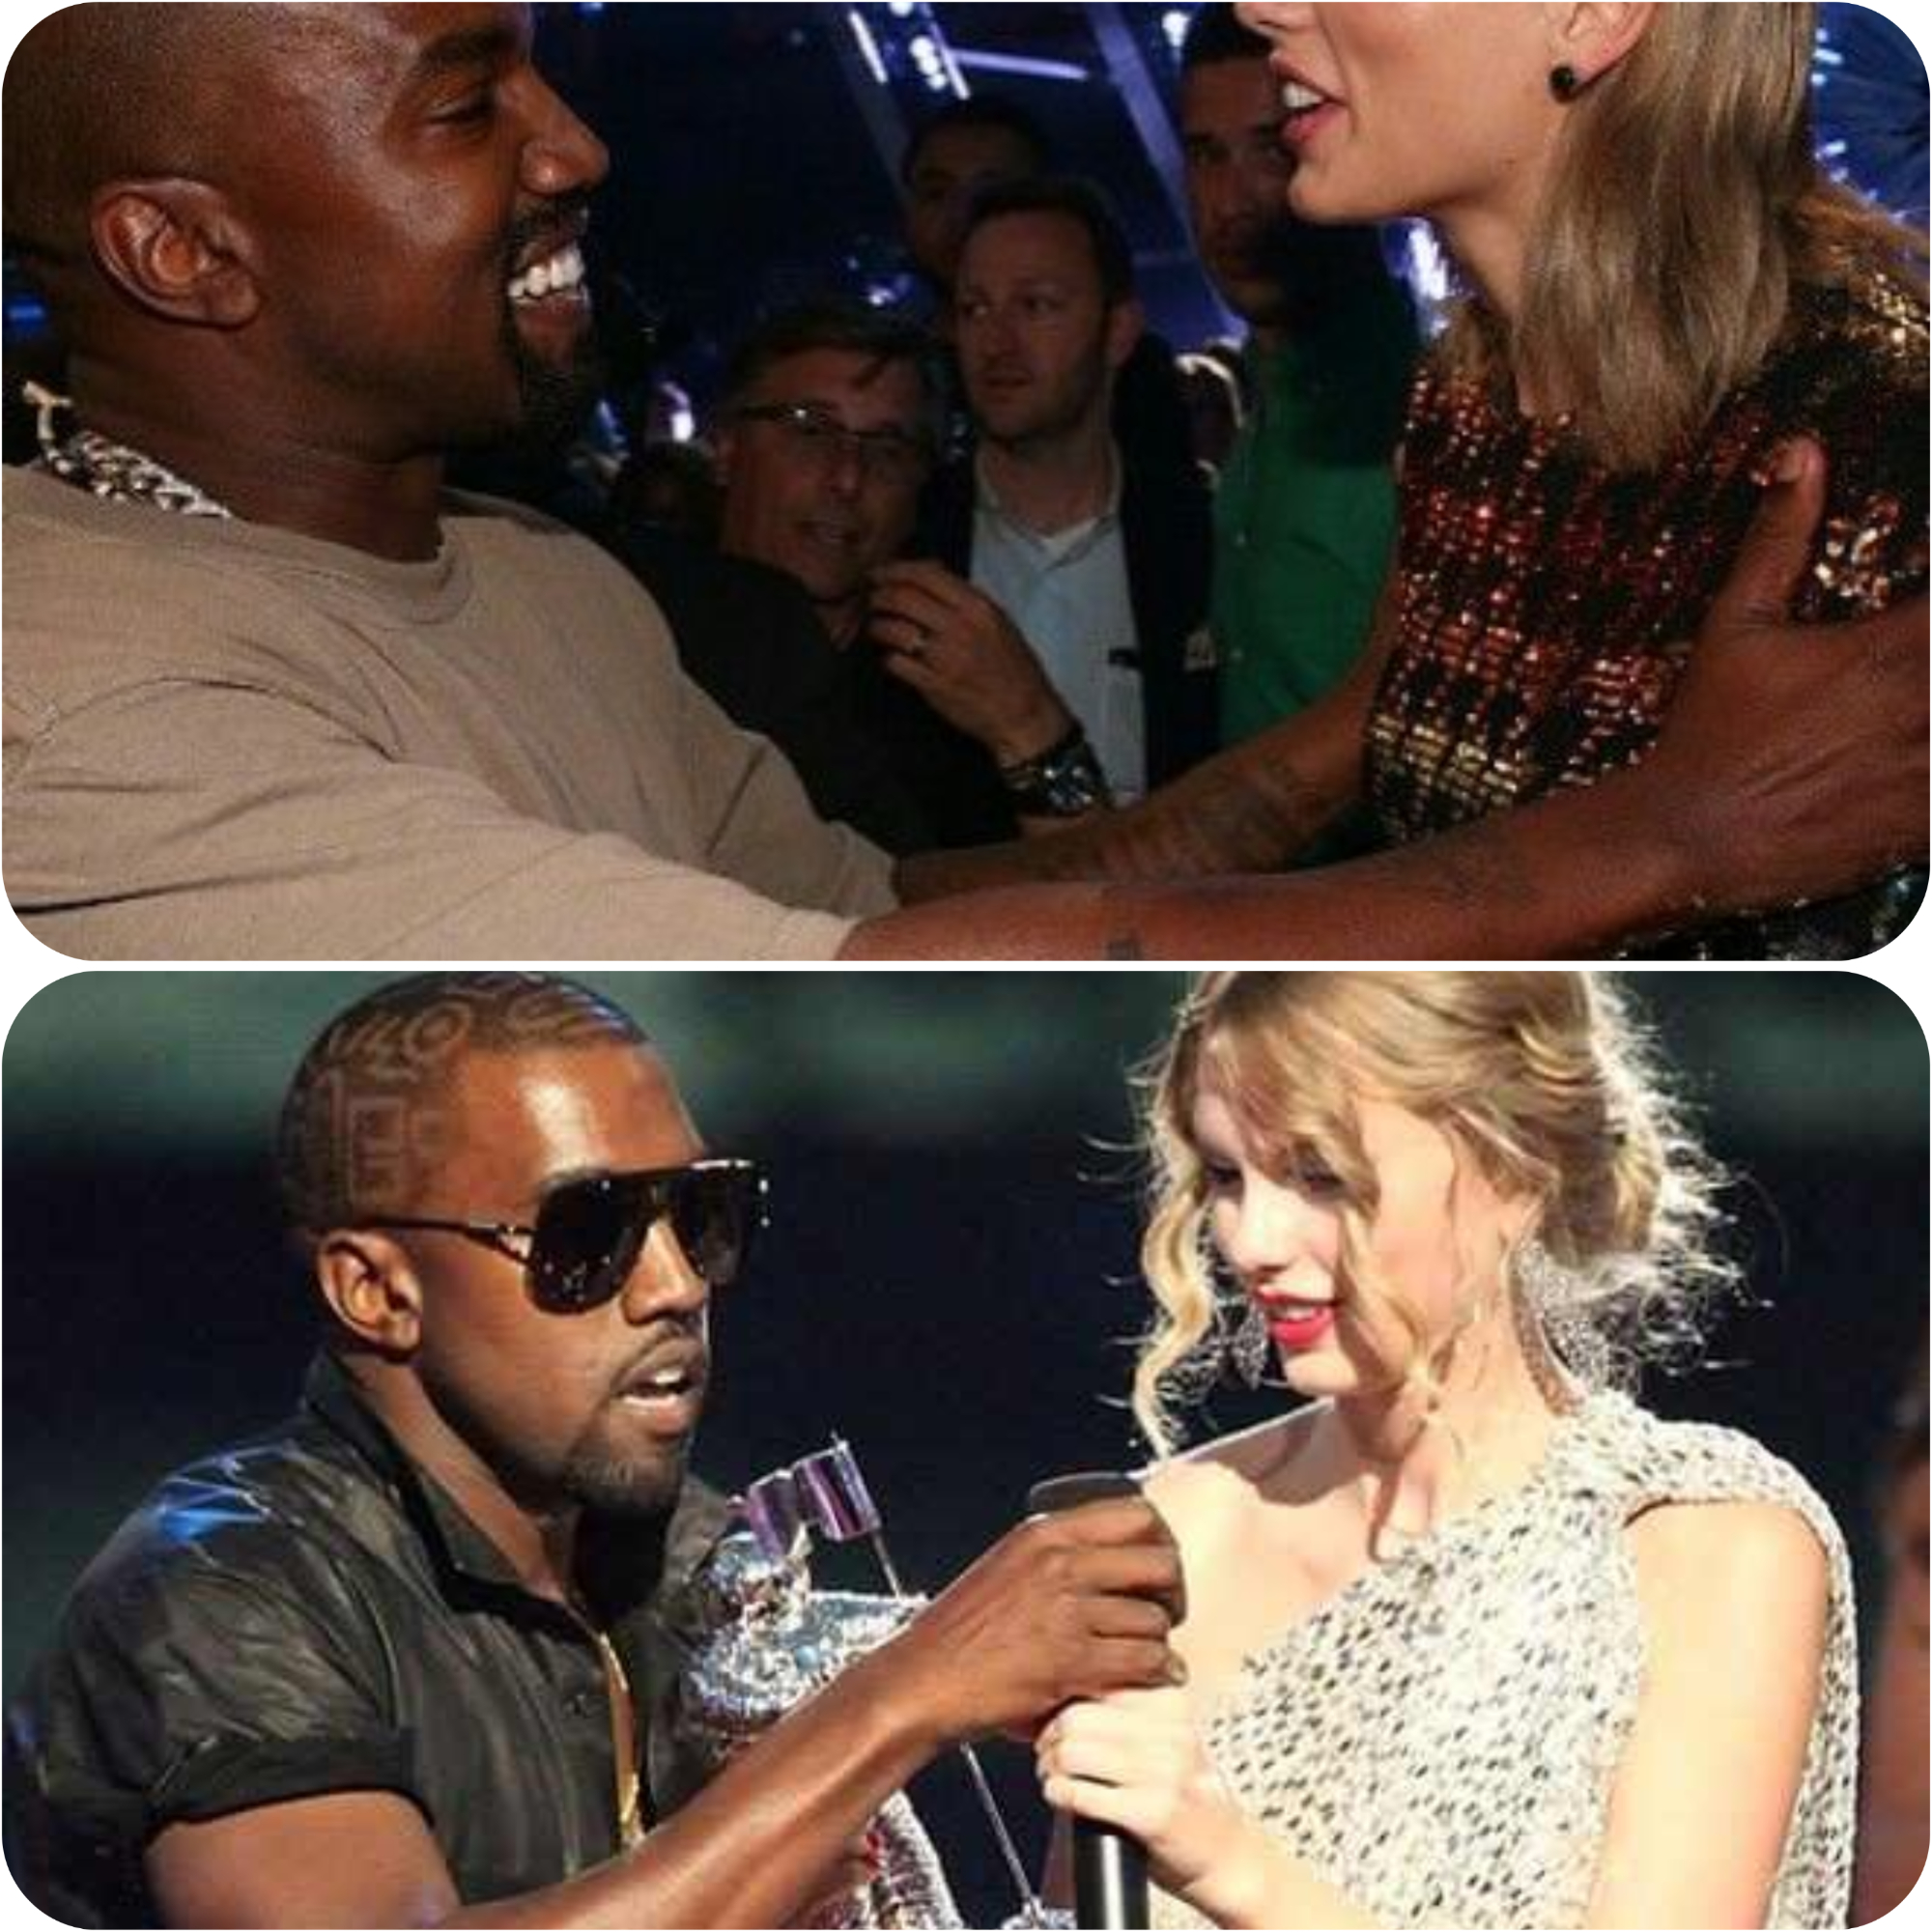 Kanye West accused of being ‘obsessed’ with Taylor Swift